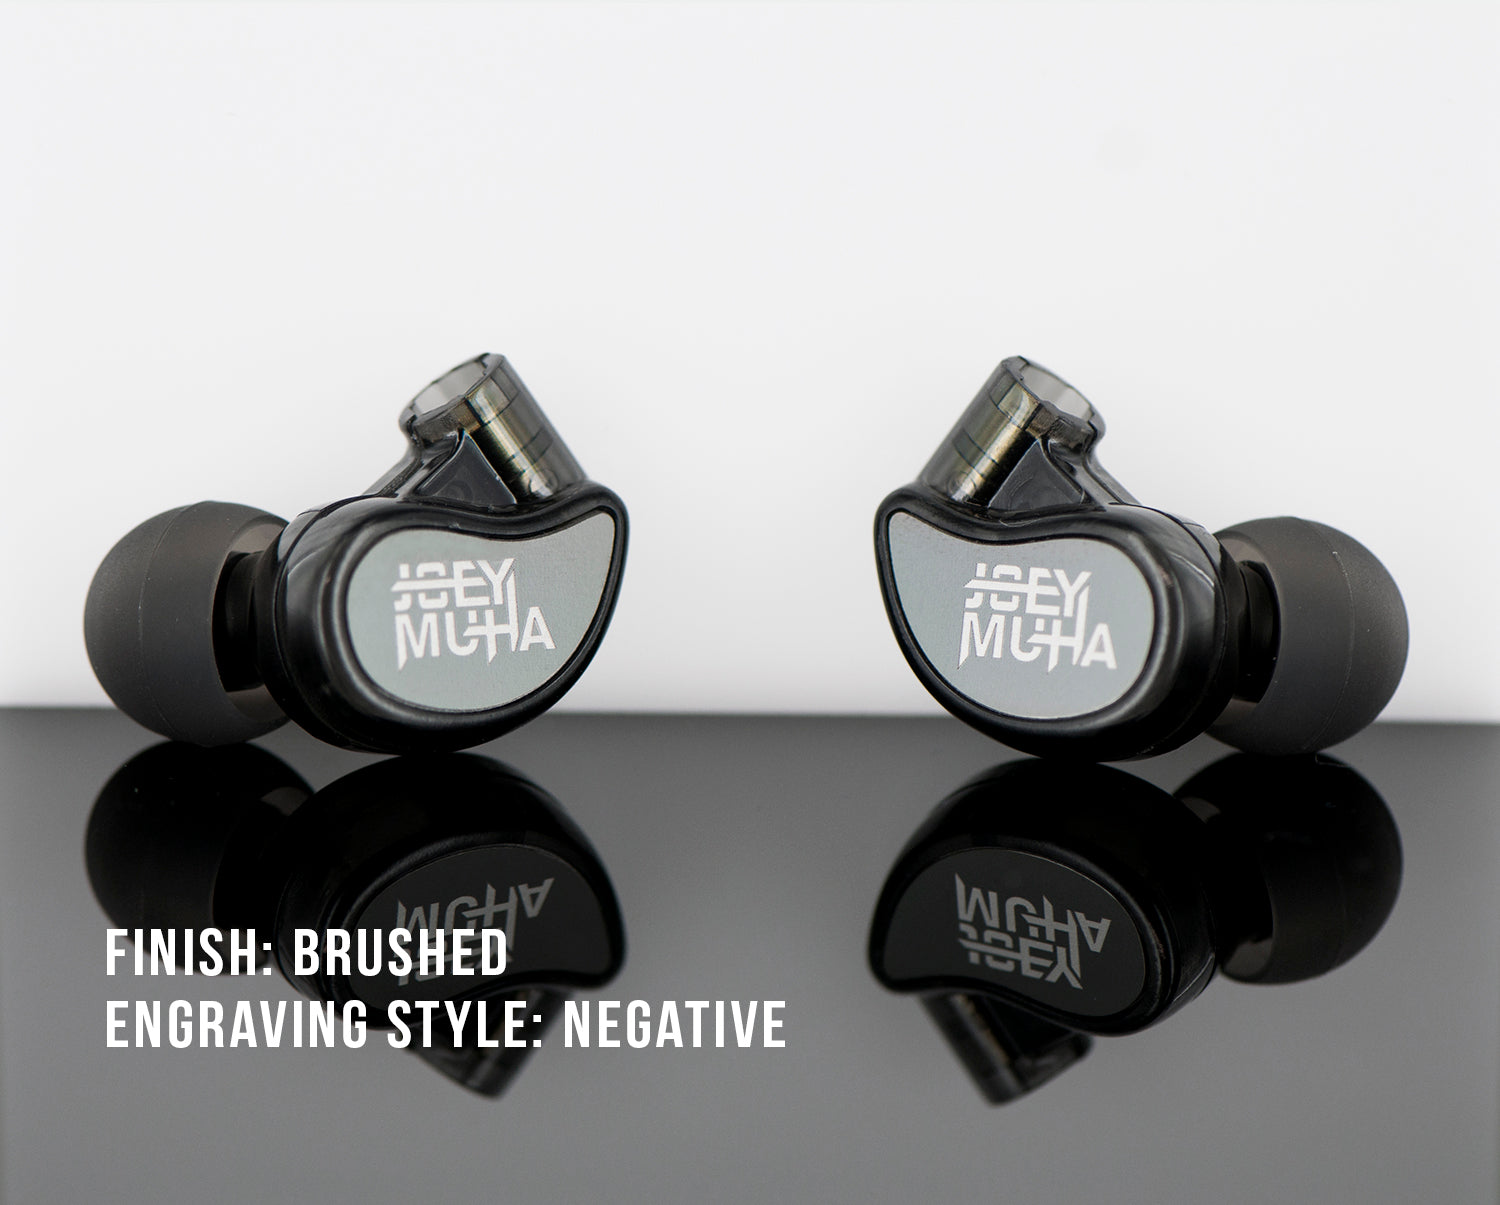 Two black in-ear monitors with "jh audio" branding, presented on a reflective surface. each monitor displays a brushed finish and negative engraving style, with text visible on their sides.